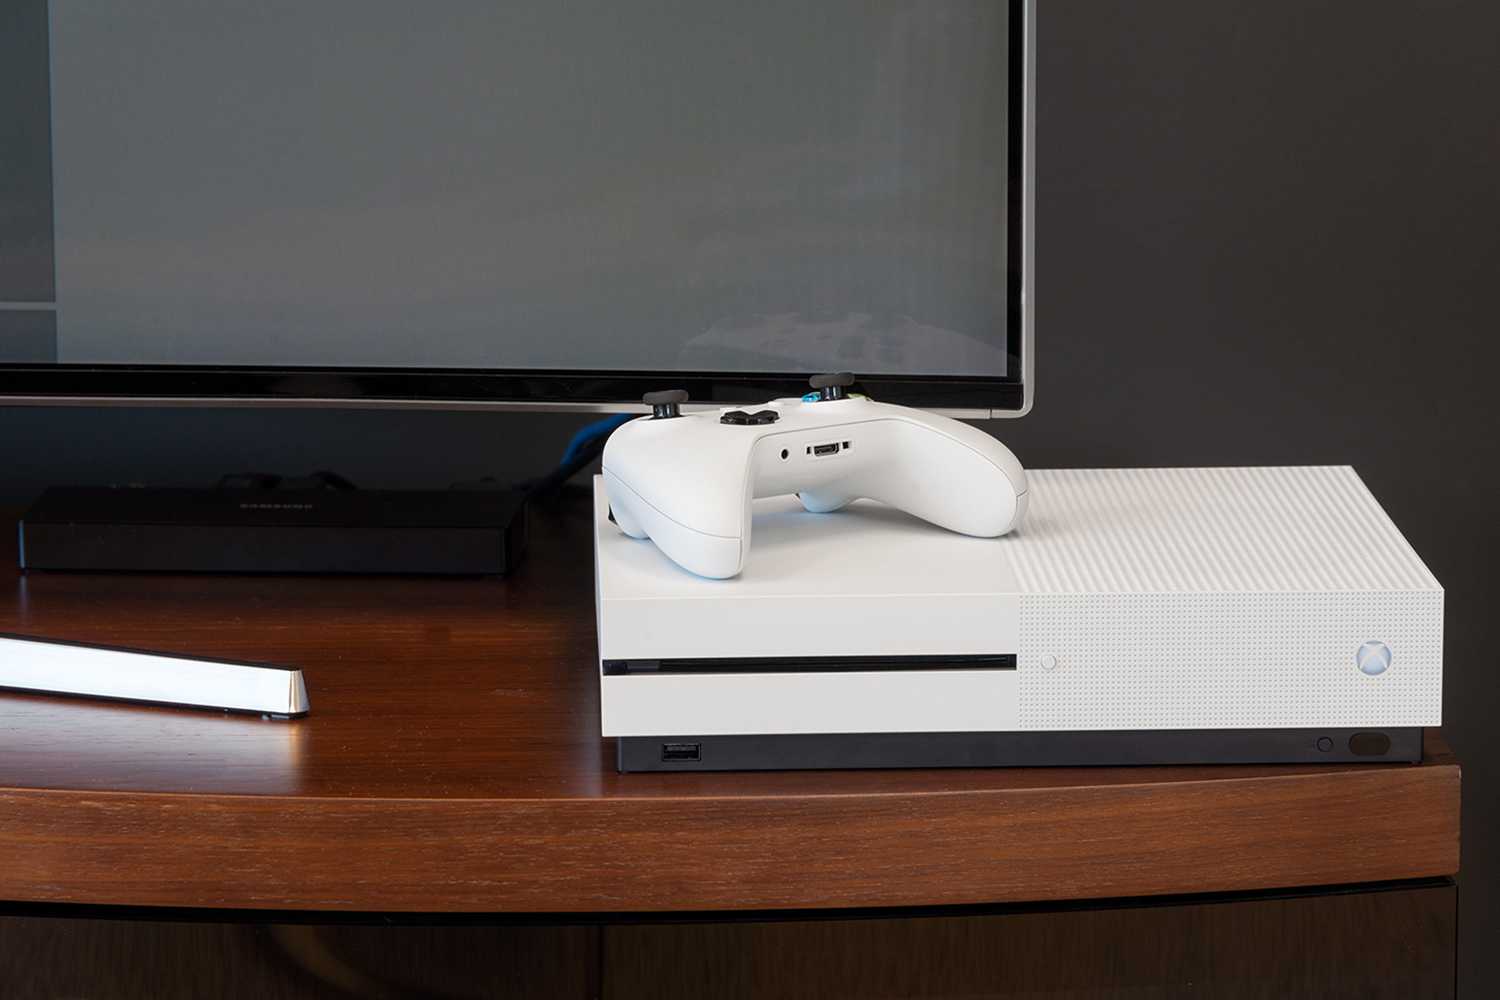 The best Xbox One S deal of 2019: Just $185 - CNET